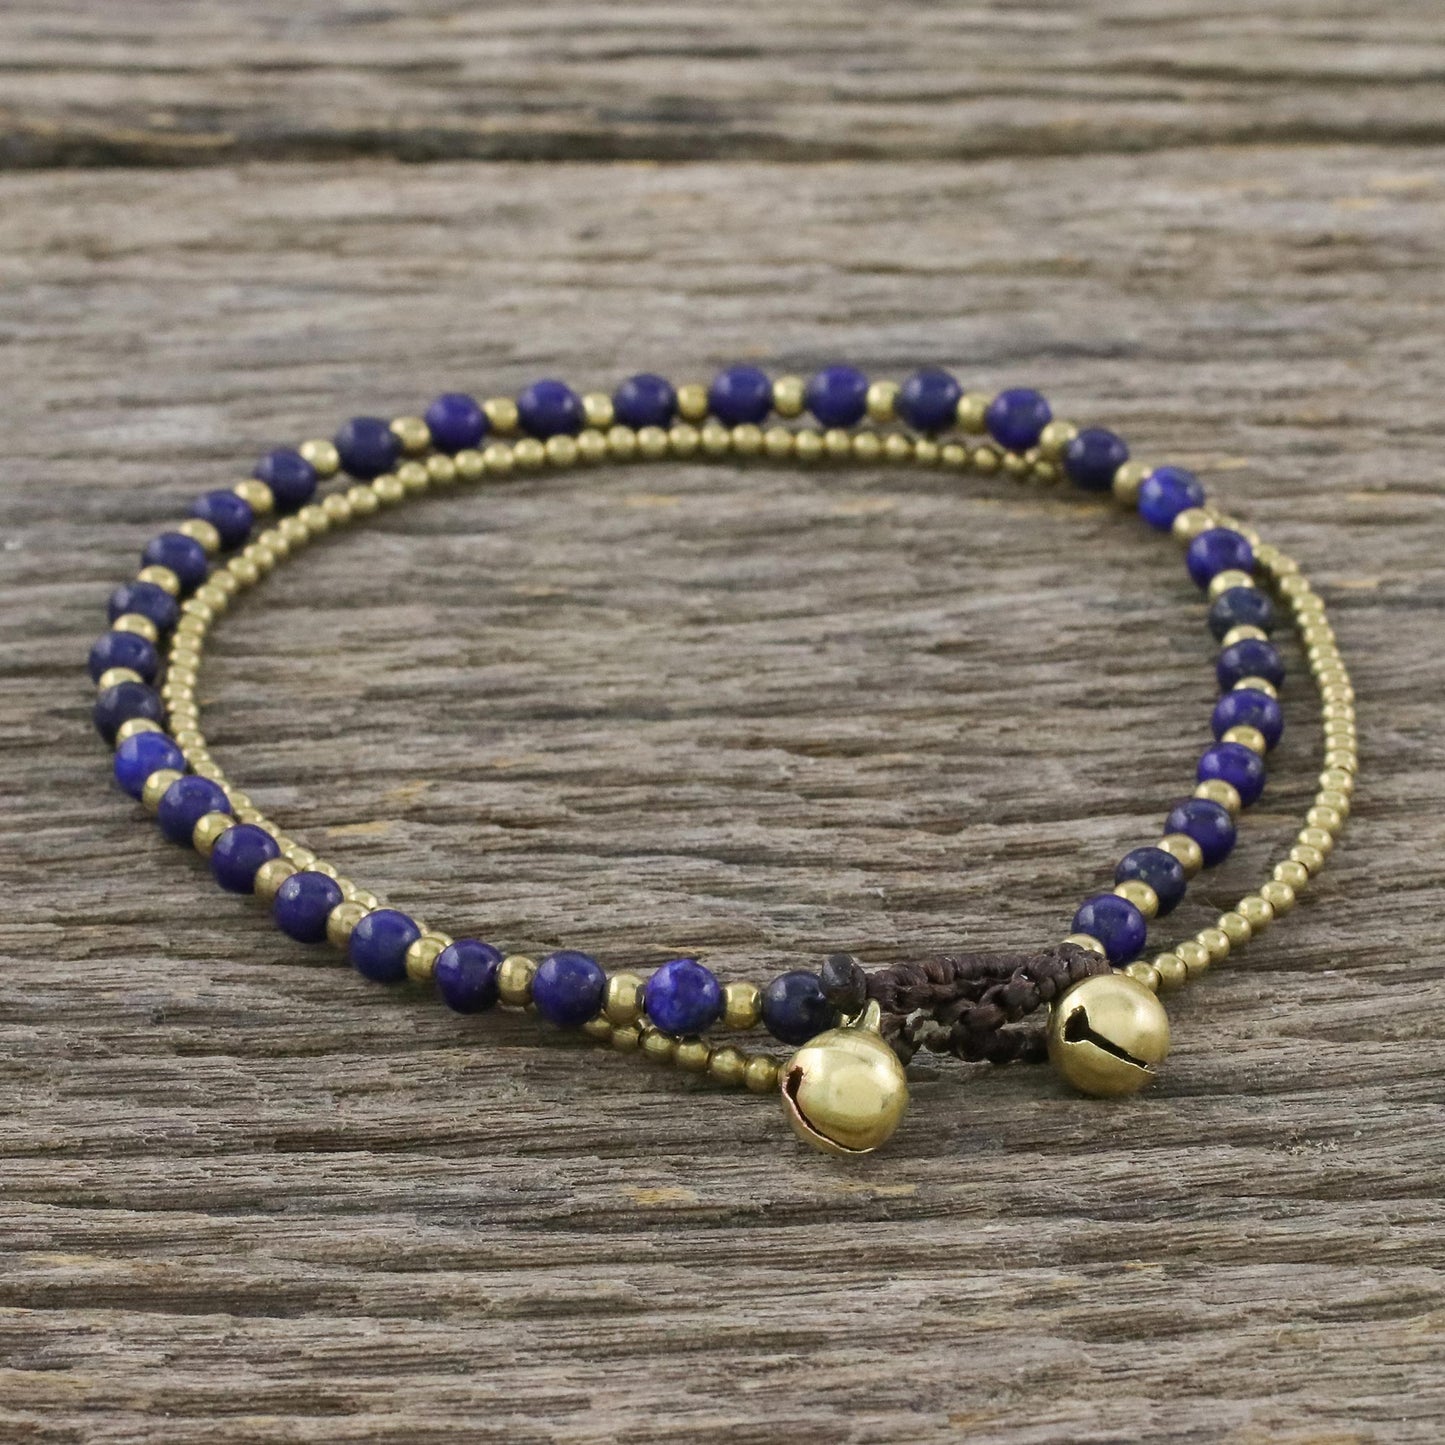 Ringing Beauty Lapis Lazuli and Brass Beaded Anklet from Thailand